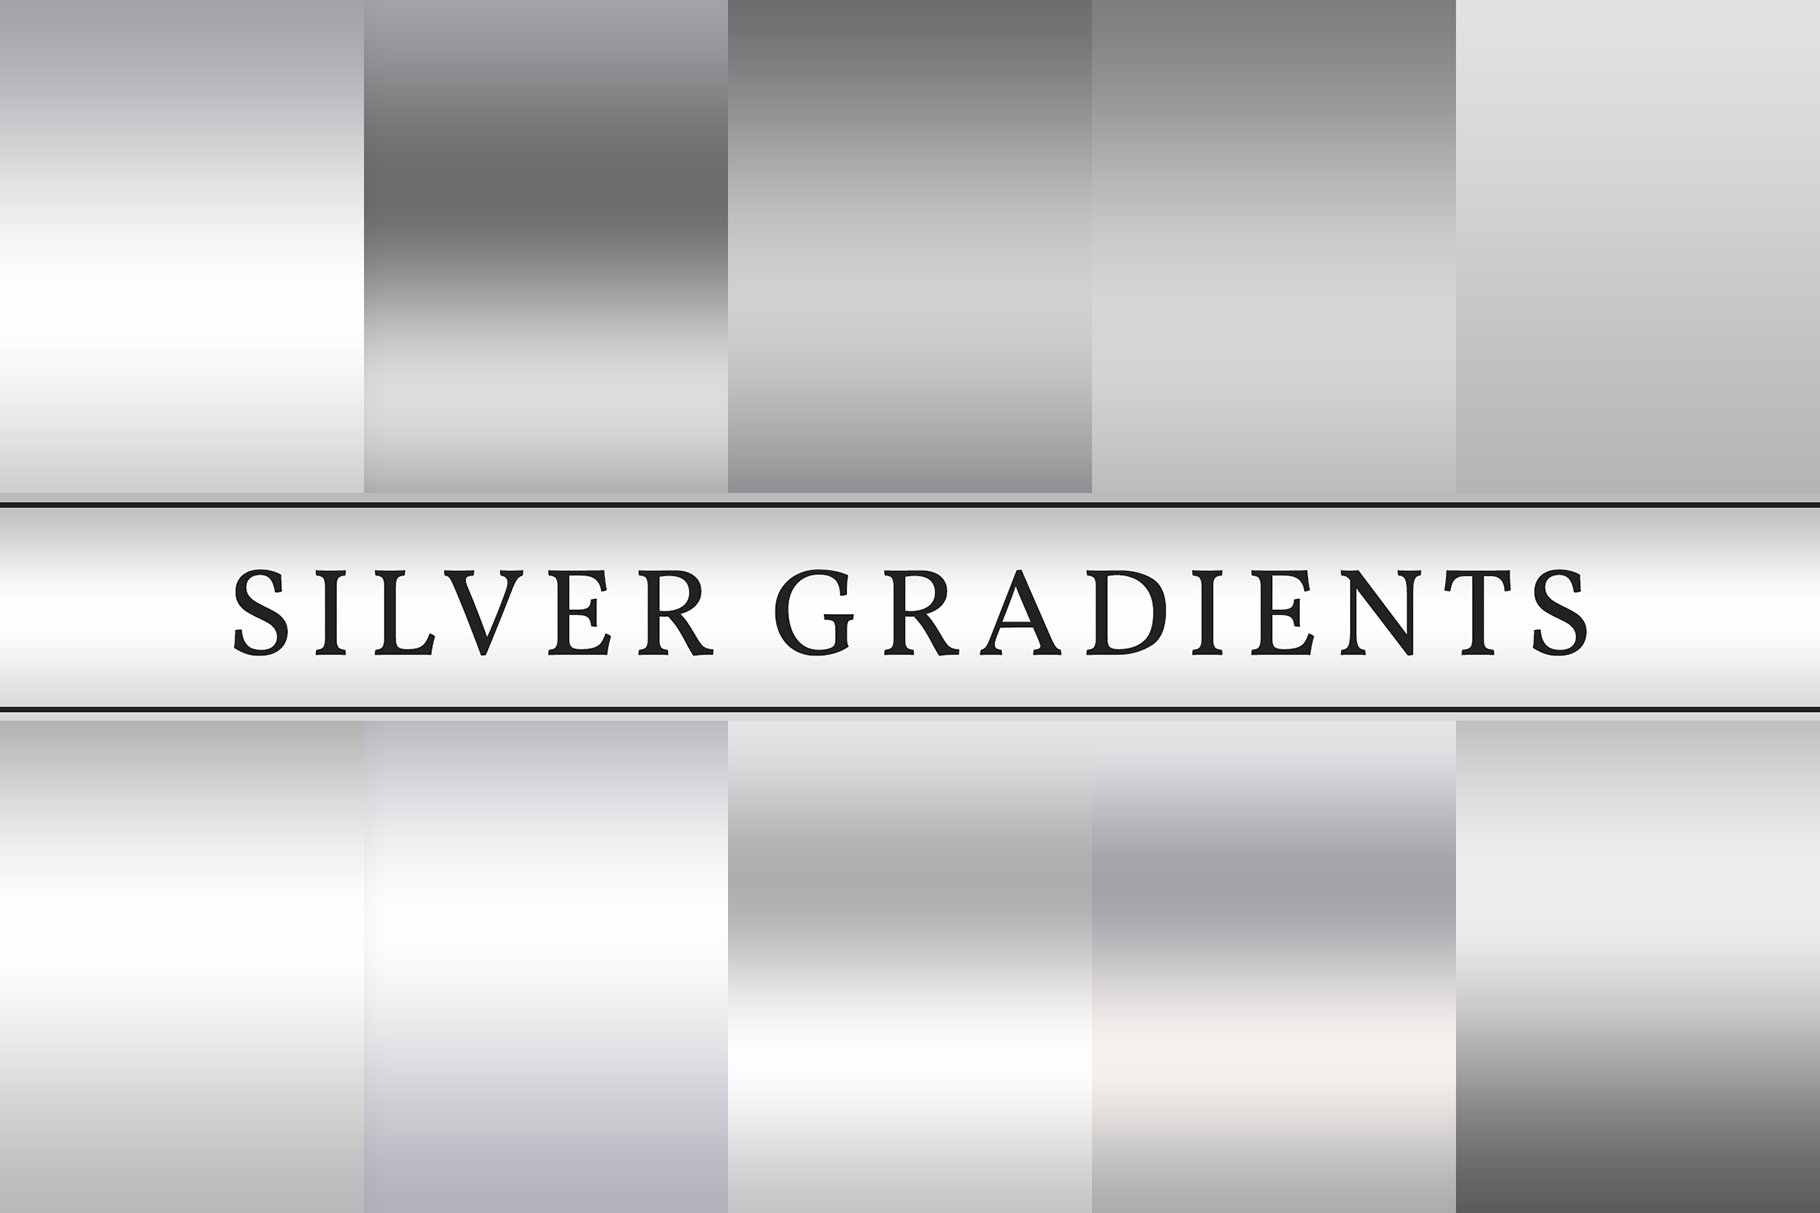 Silver Gradientscover image.